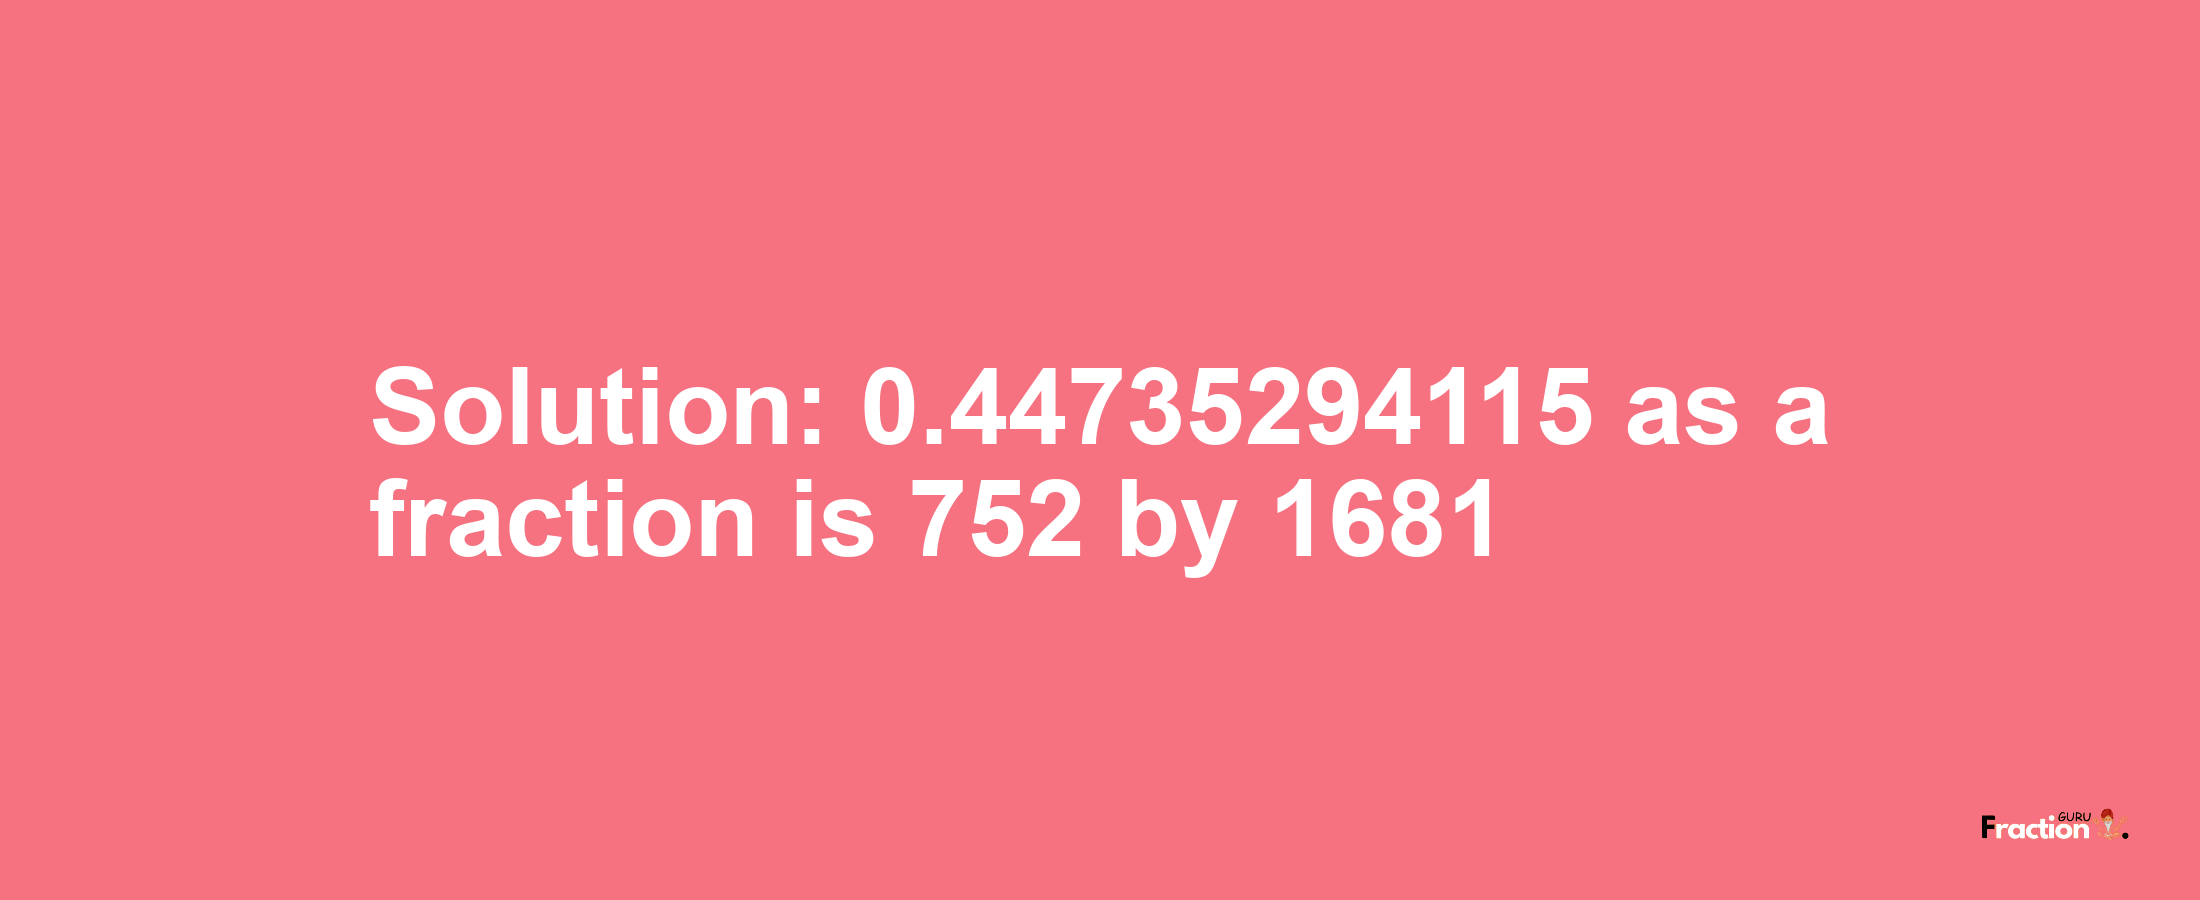 Solution:0.44735294115 as a fraction is 752/1681